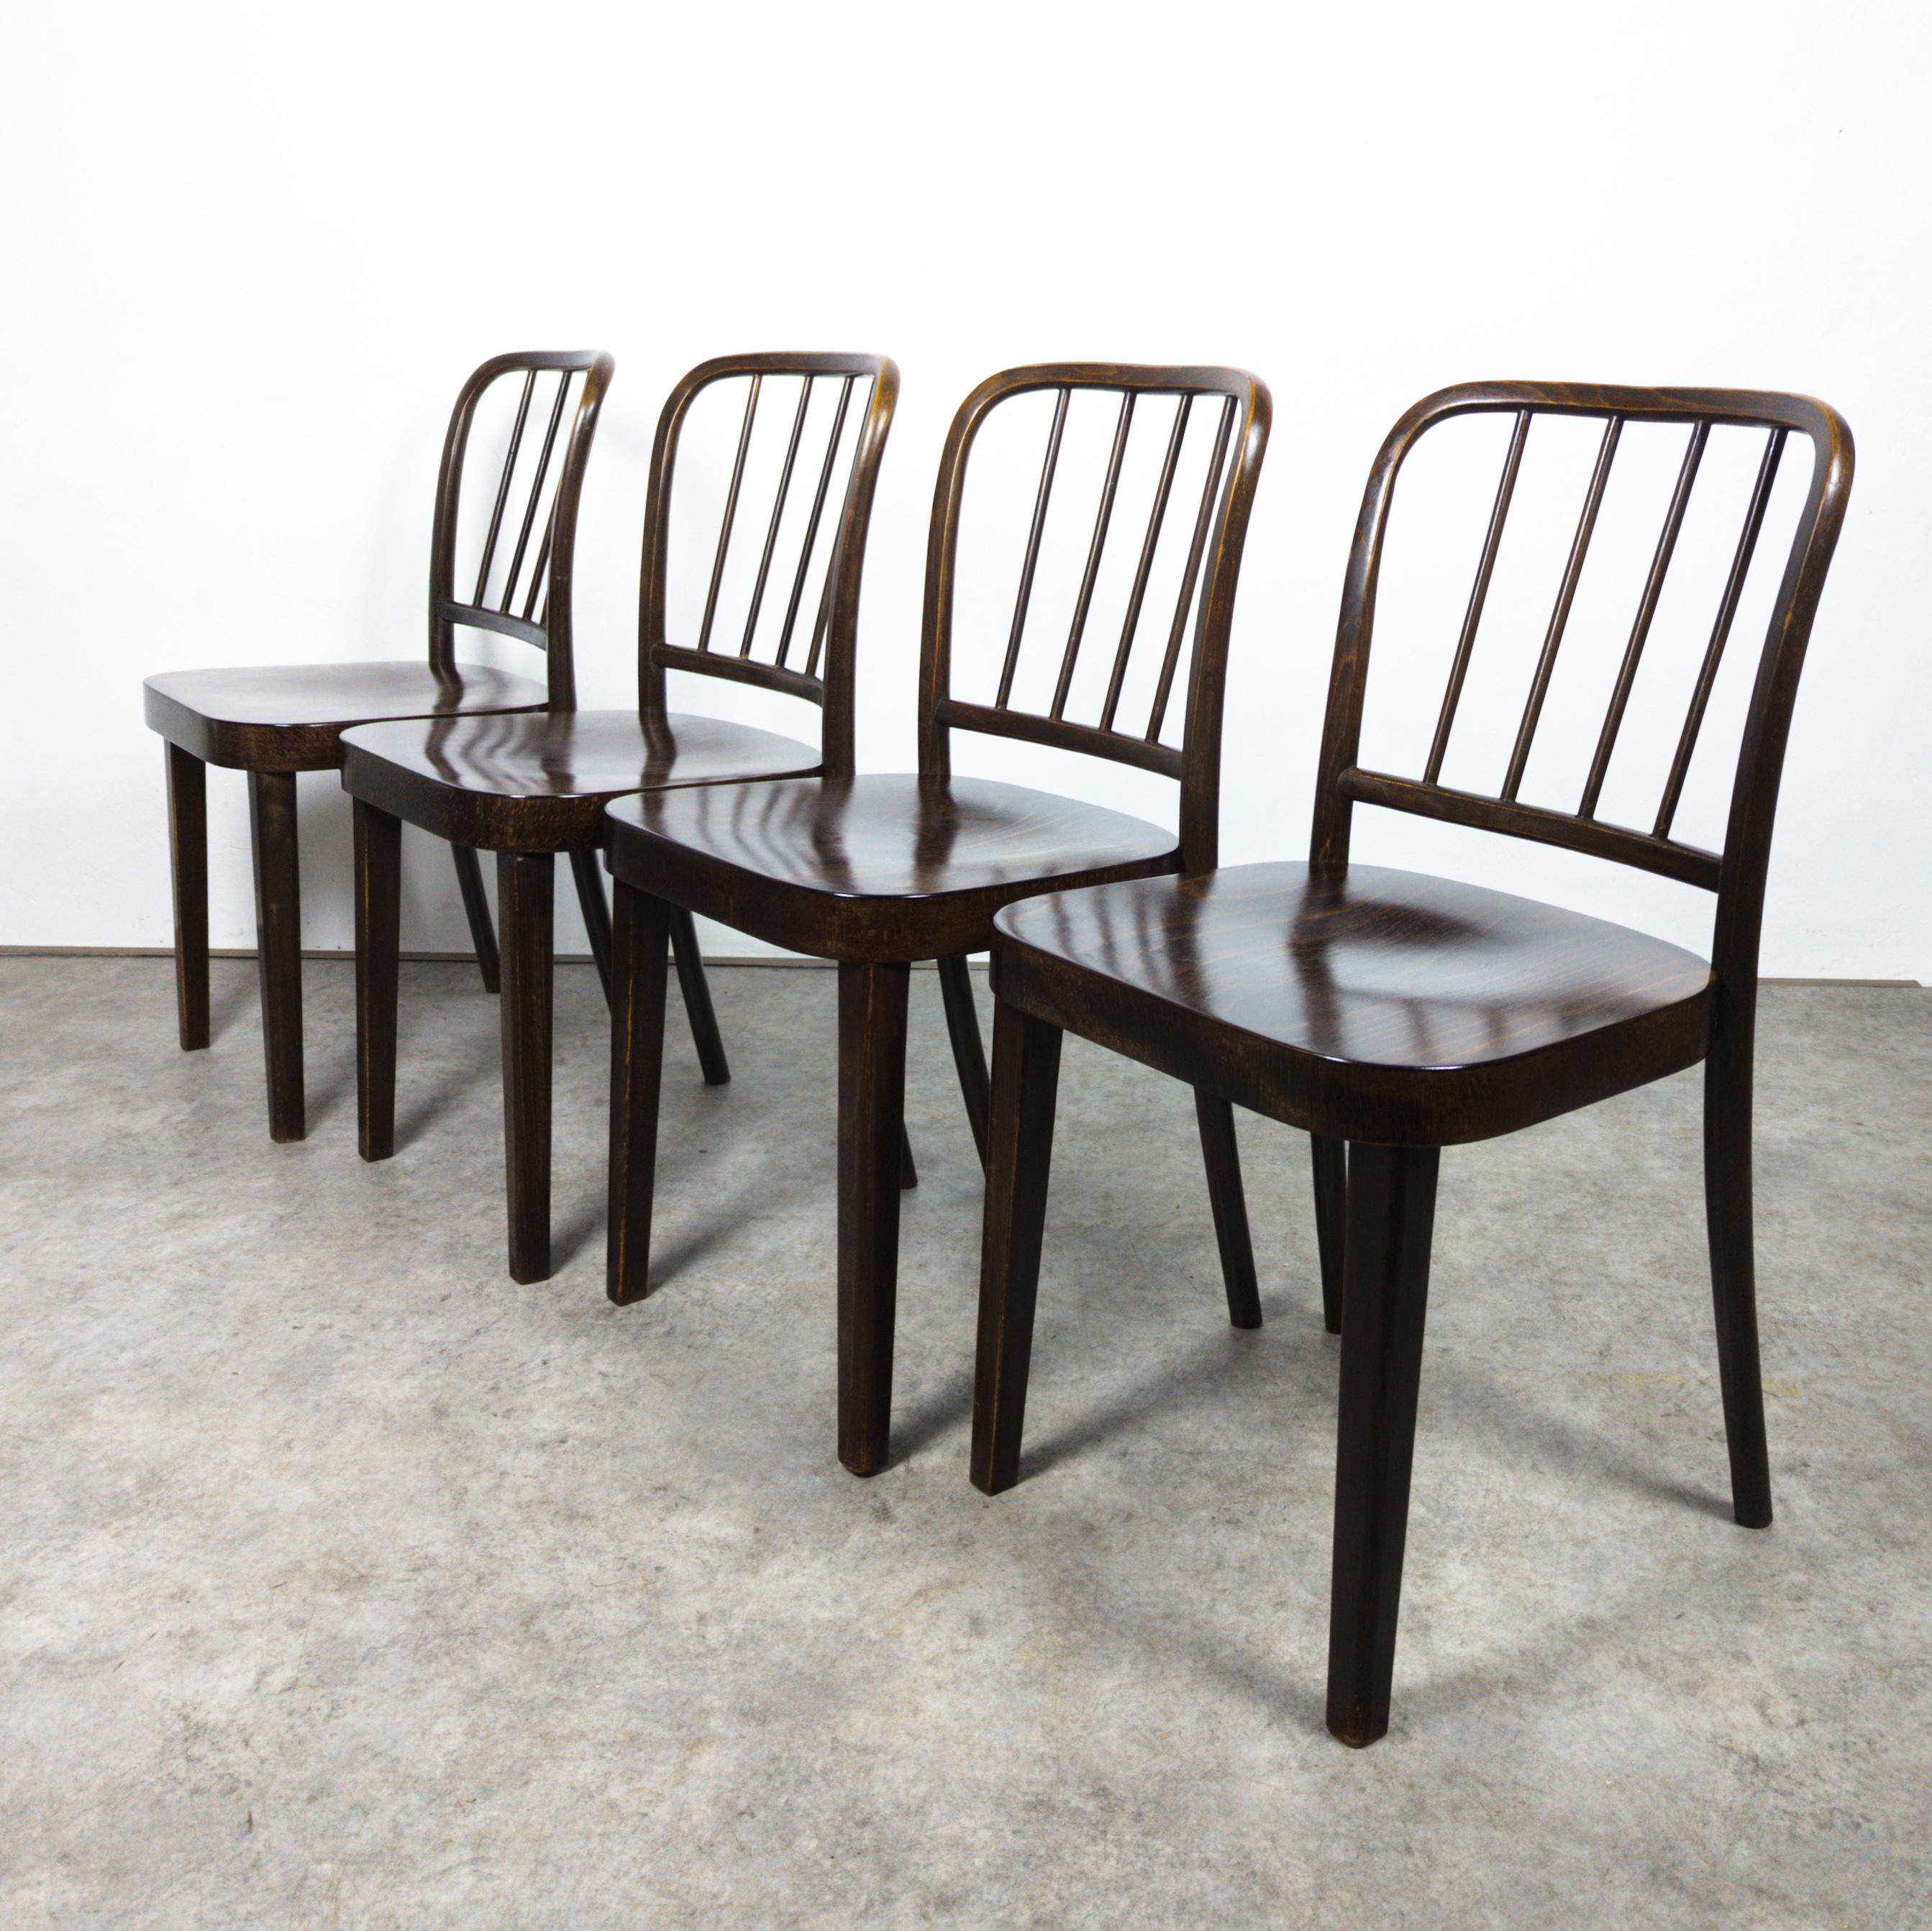 Set of four very rare 1932 Josef Hoffmann chairs version A 811/4 crafted from lacquered beech wood. The chairs maintain its original charm with a delightful patina with all four seats being expertly refinished. Structurally sound, firm and steady.